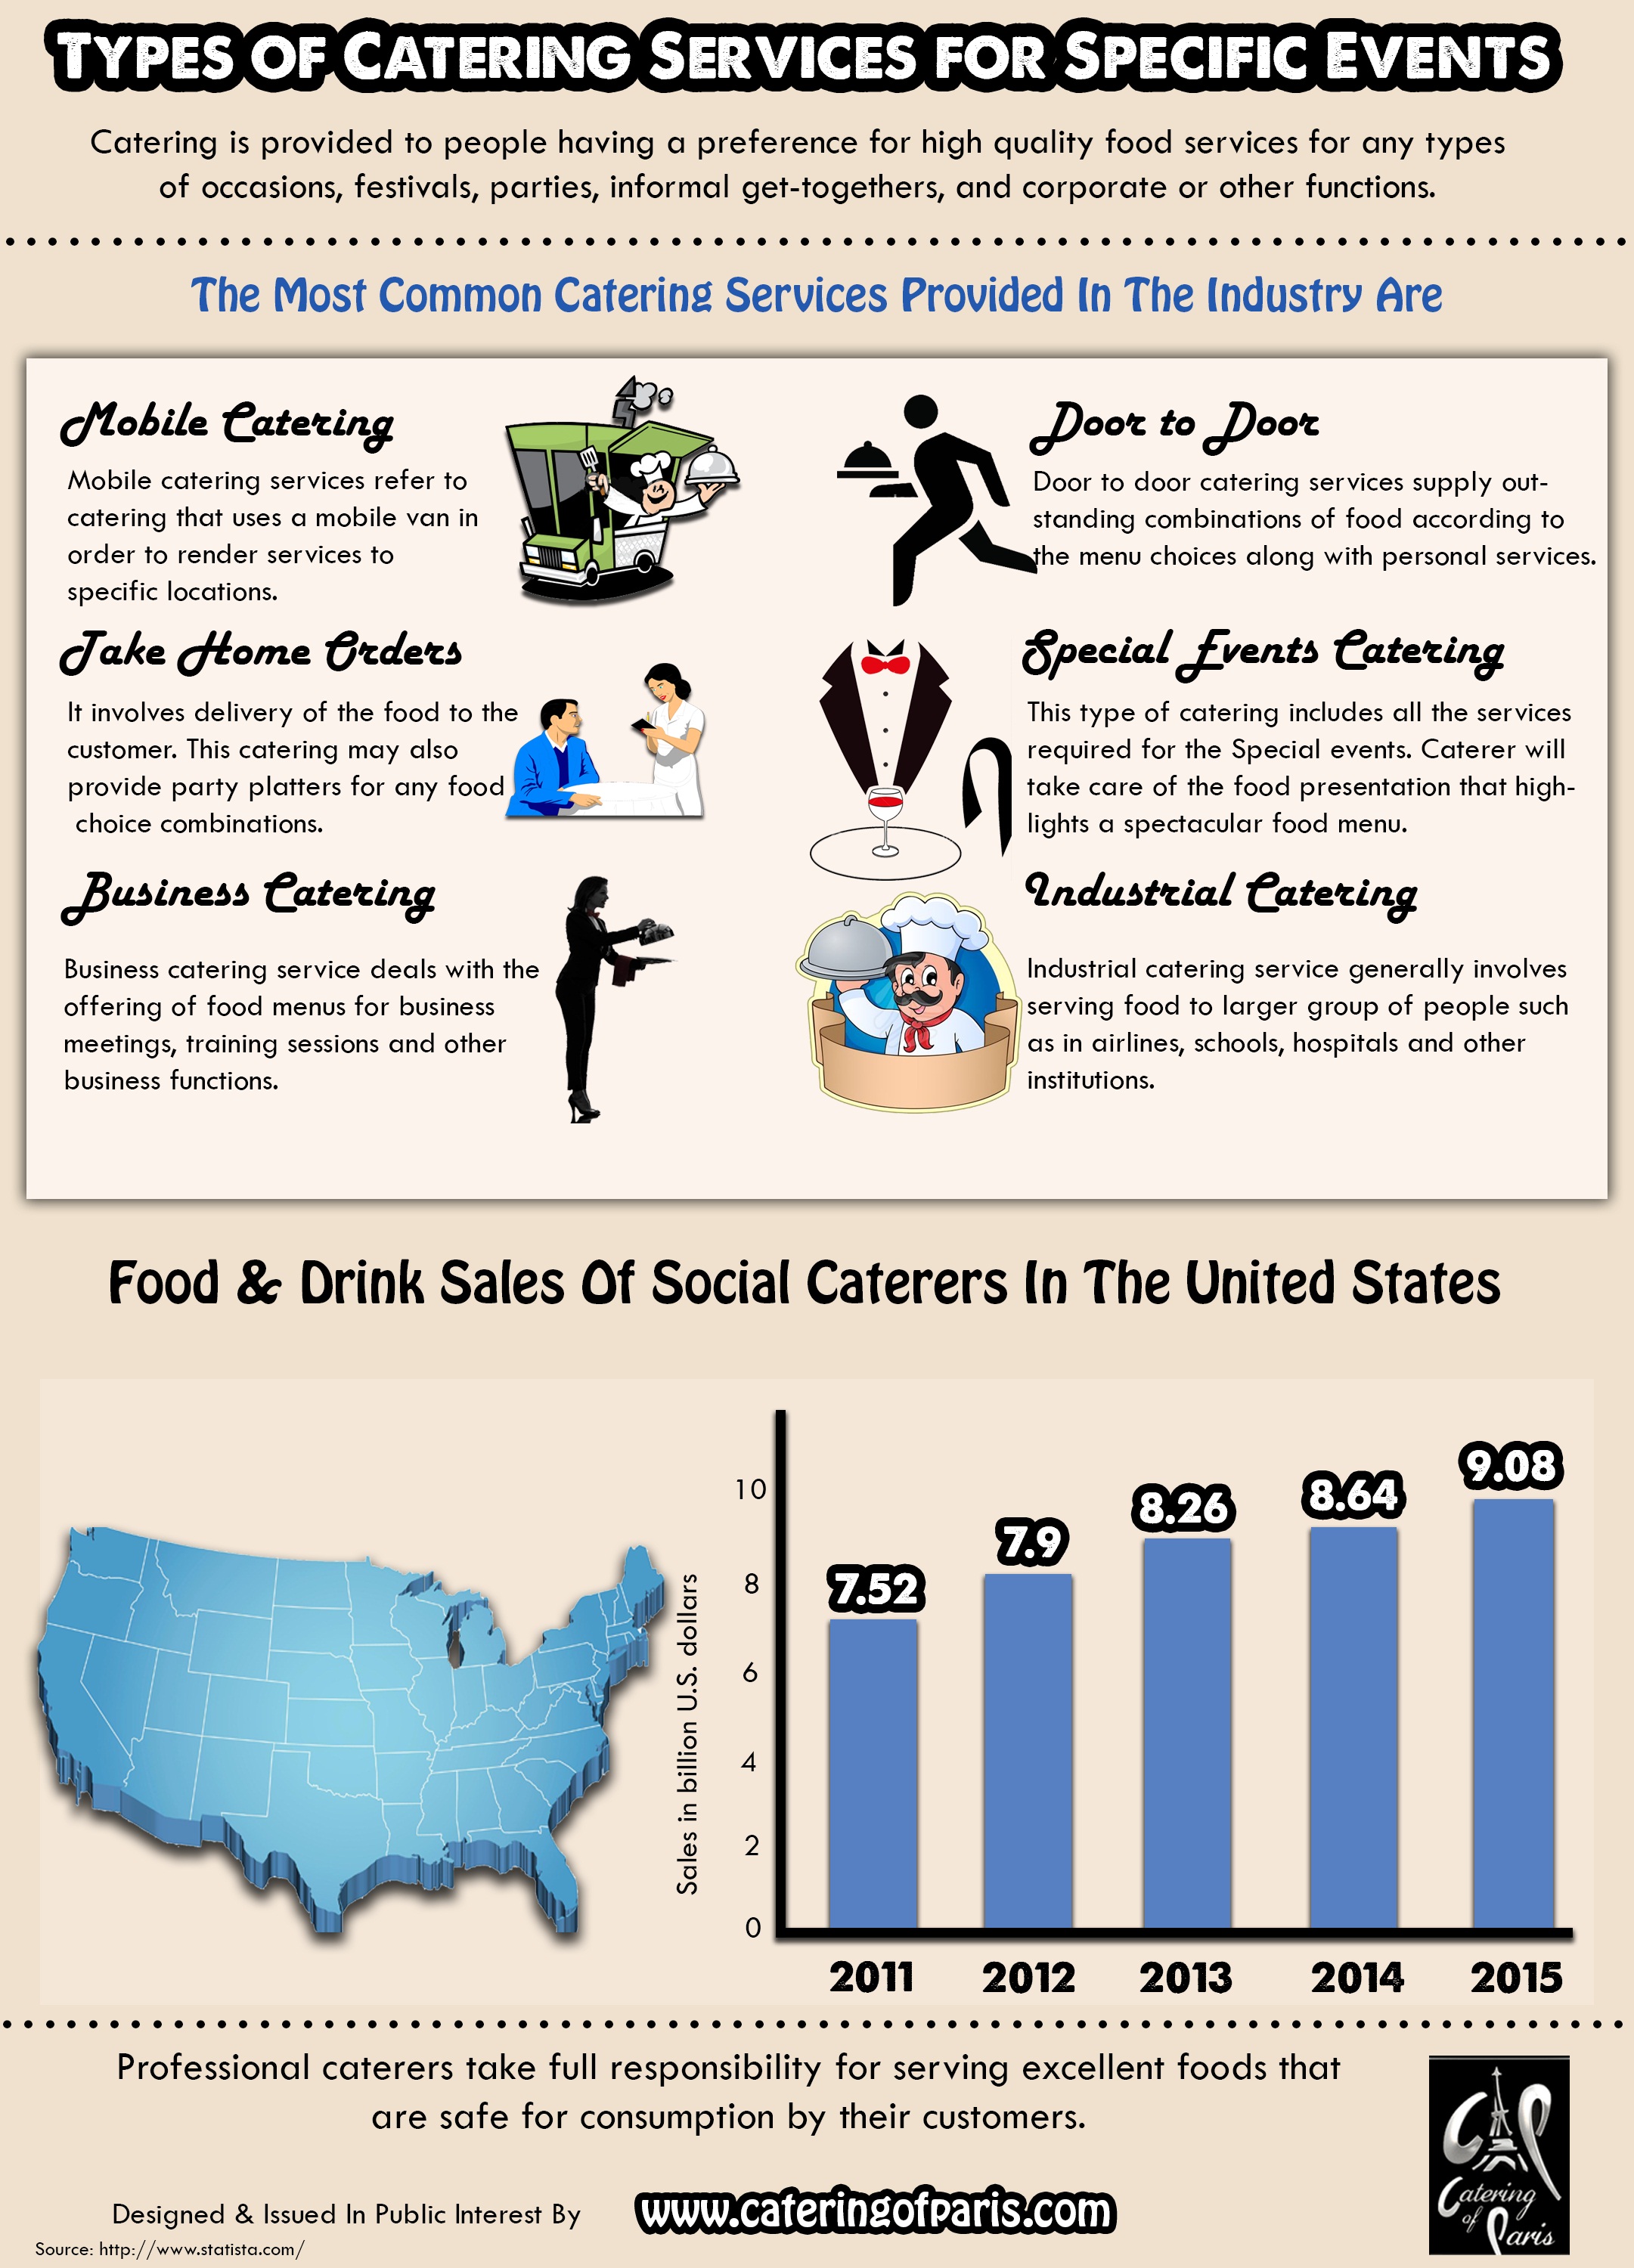 Types of Catering Services for Specific Events